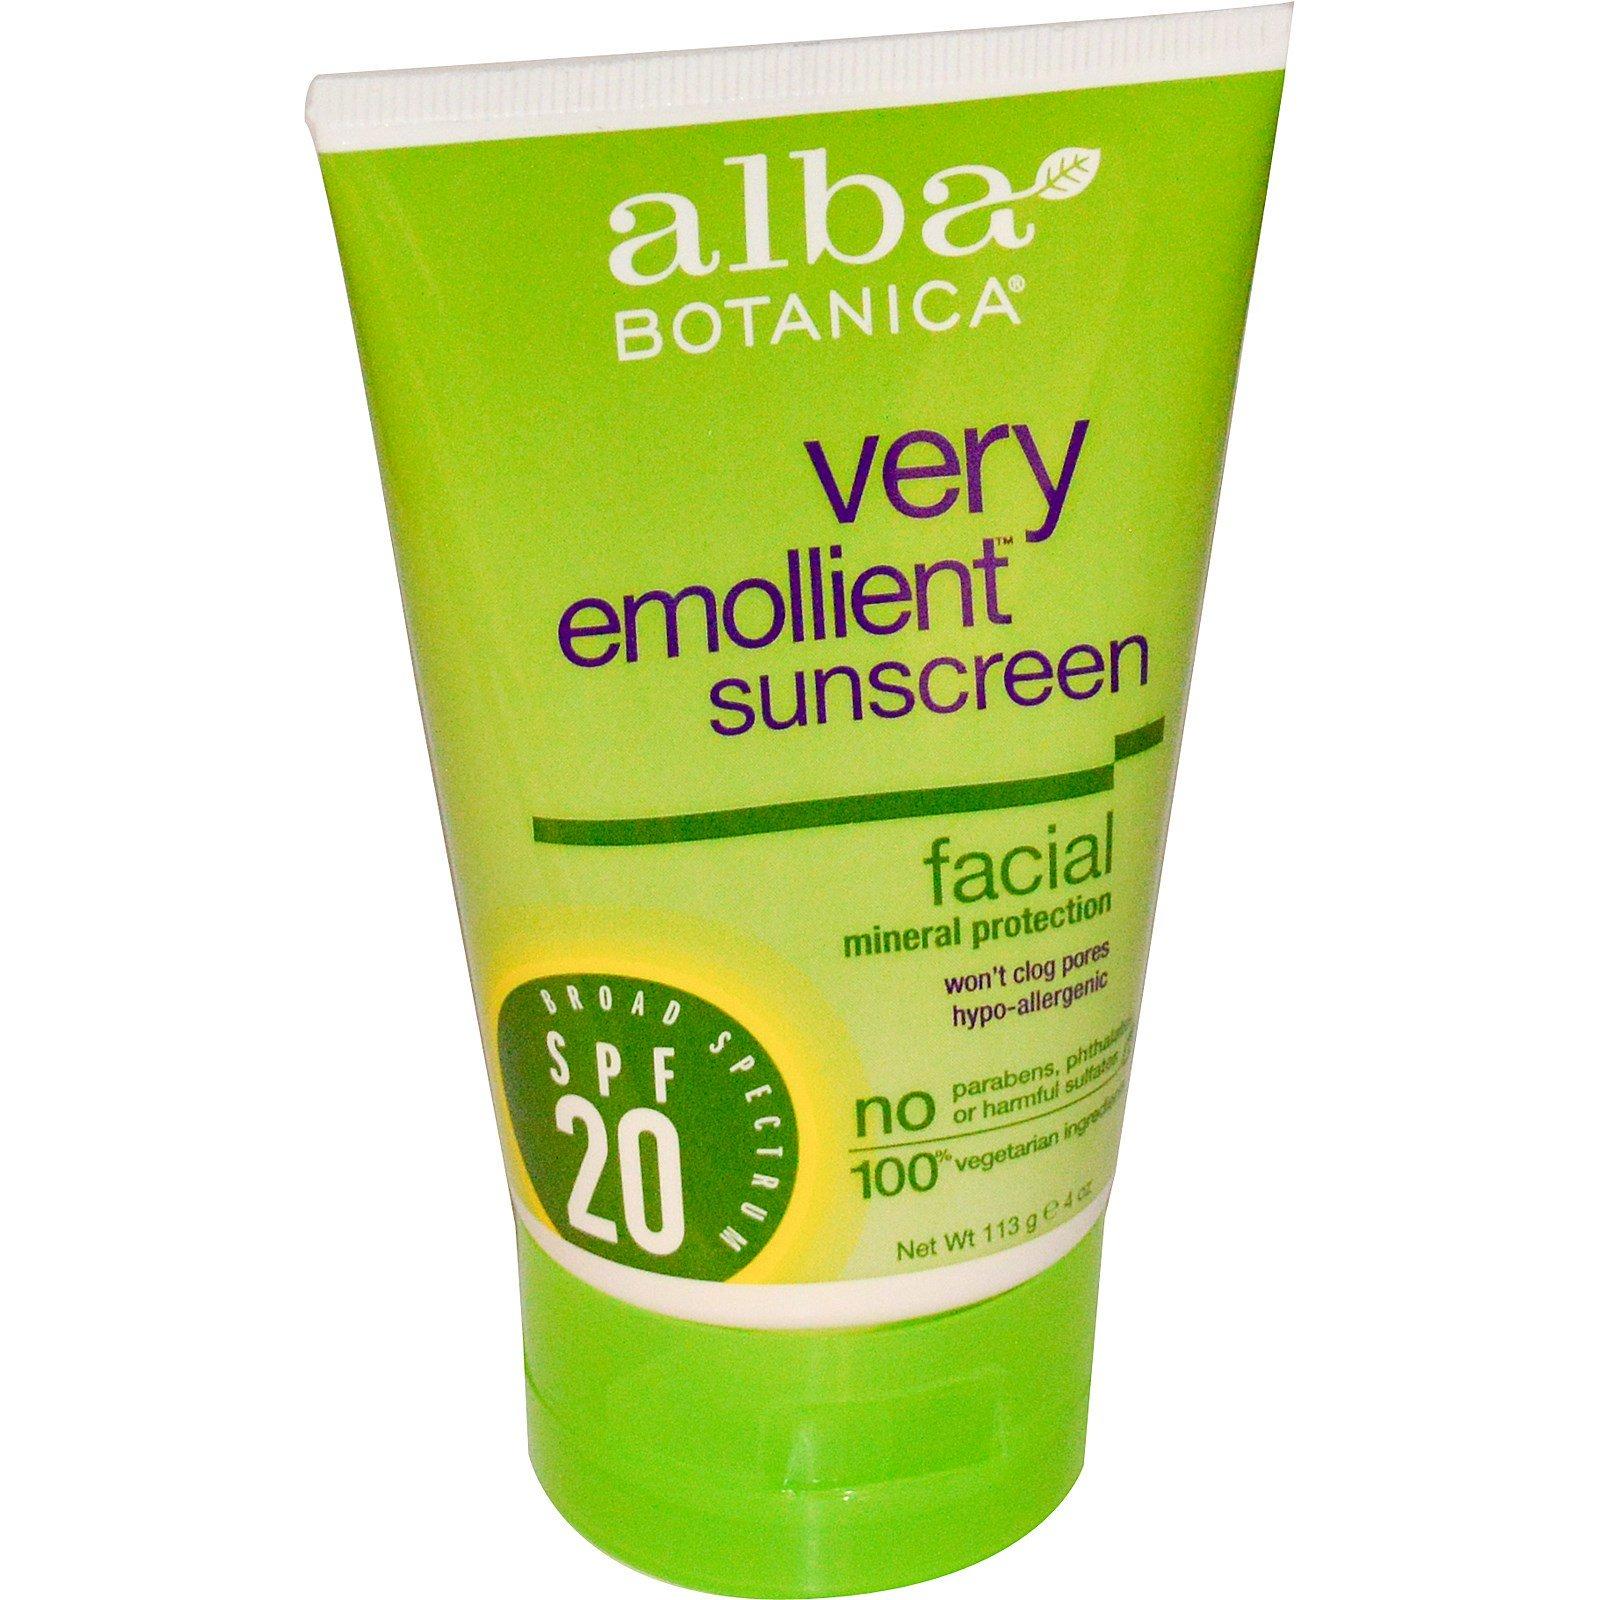 Very Emollient Sunscreen Mineral Protection, Facial SPF 20